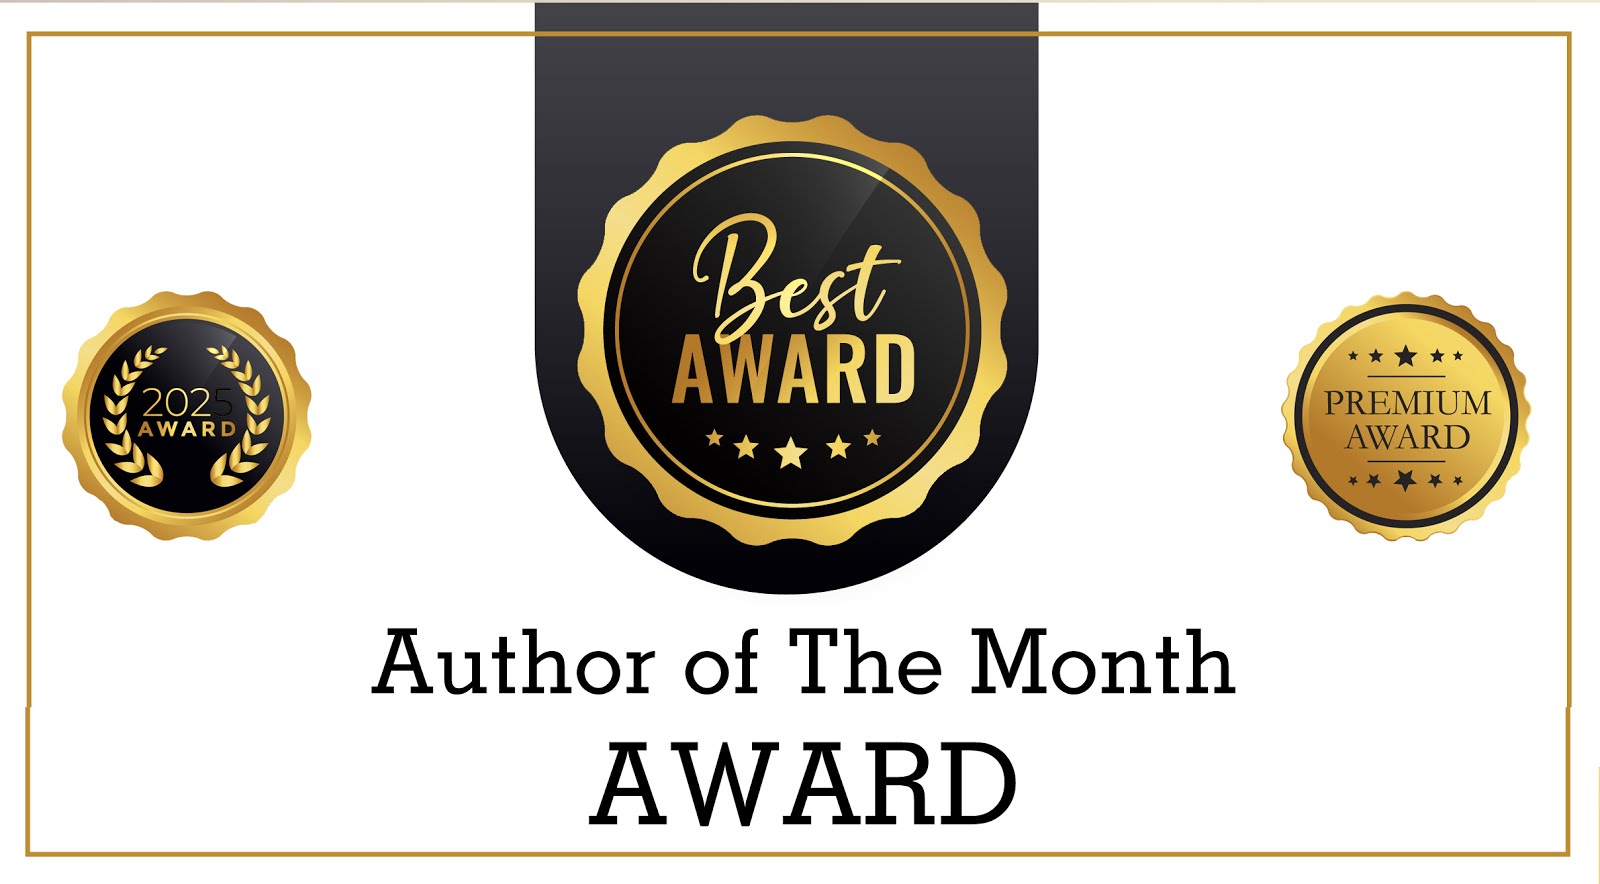 Author of The Month Award